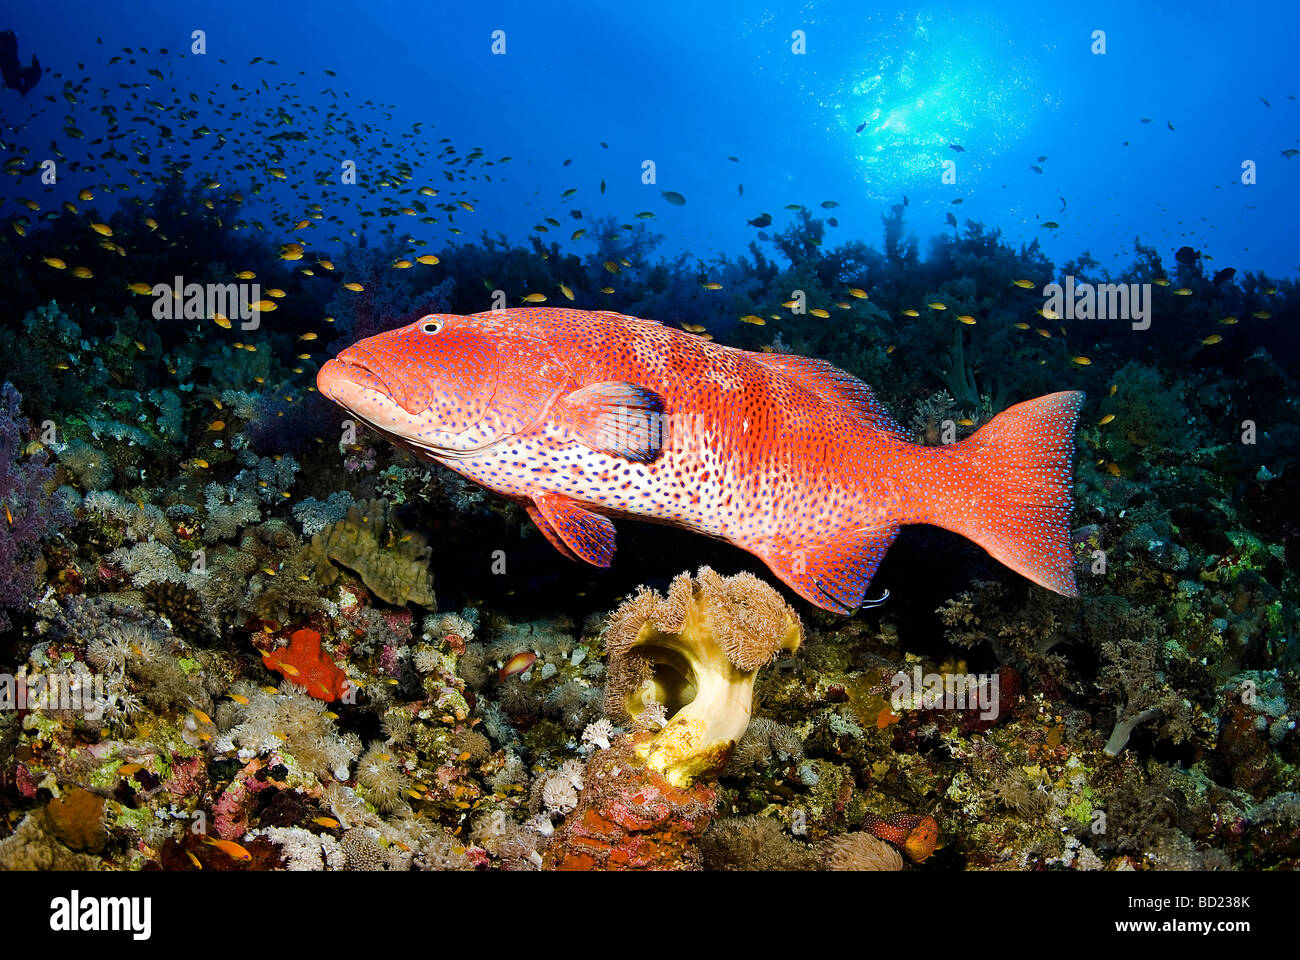 coral grouper at elphinstone reef, egypt Stock Photo